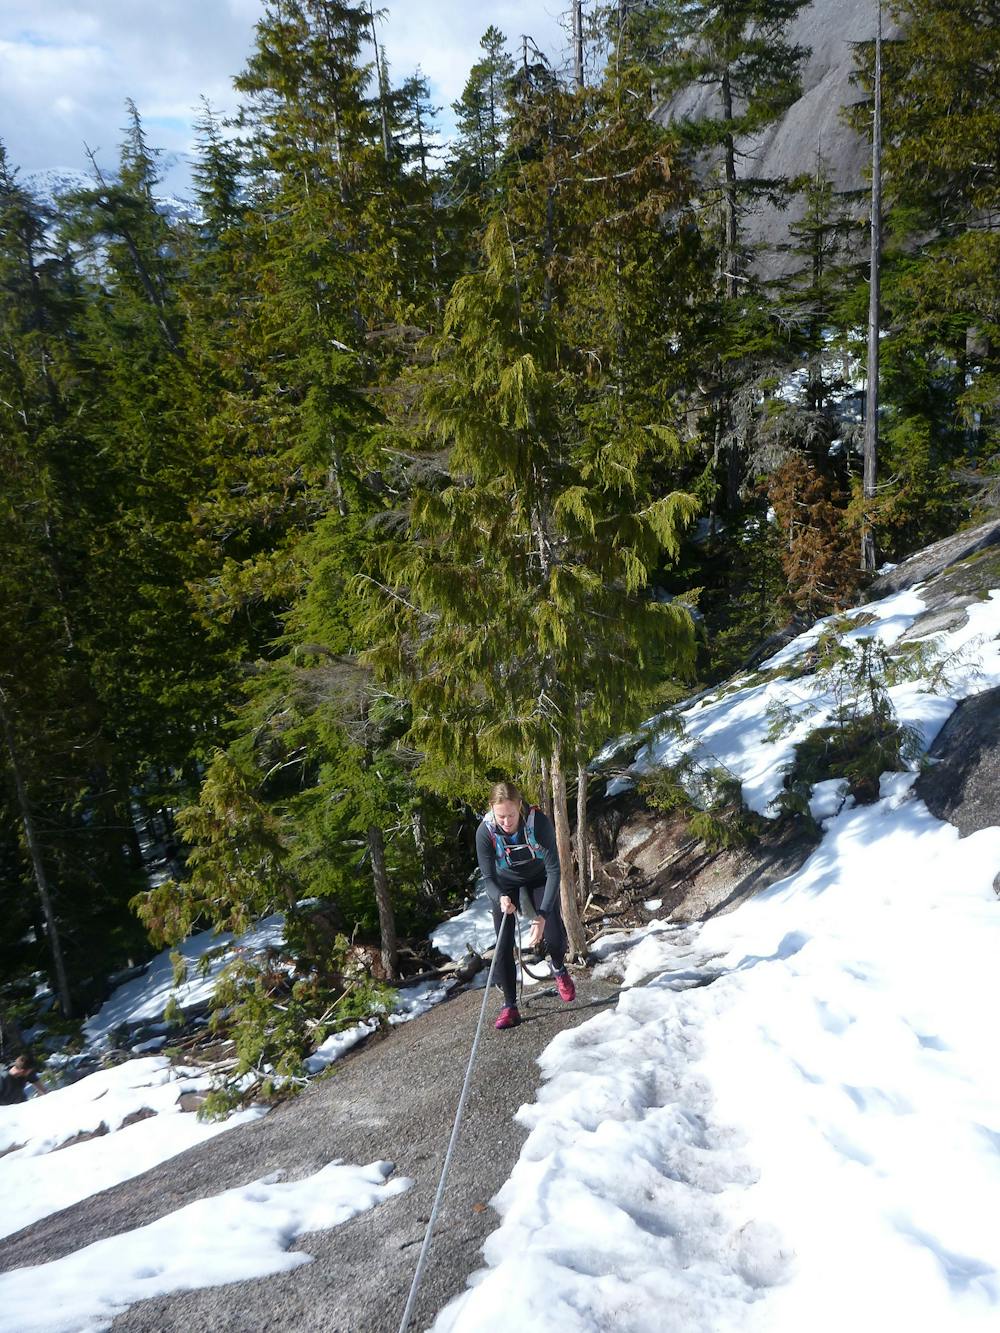 Sea To Summit Trail in Squamish